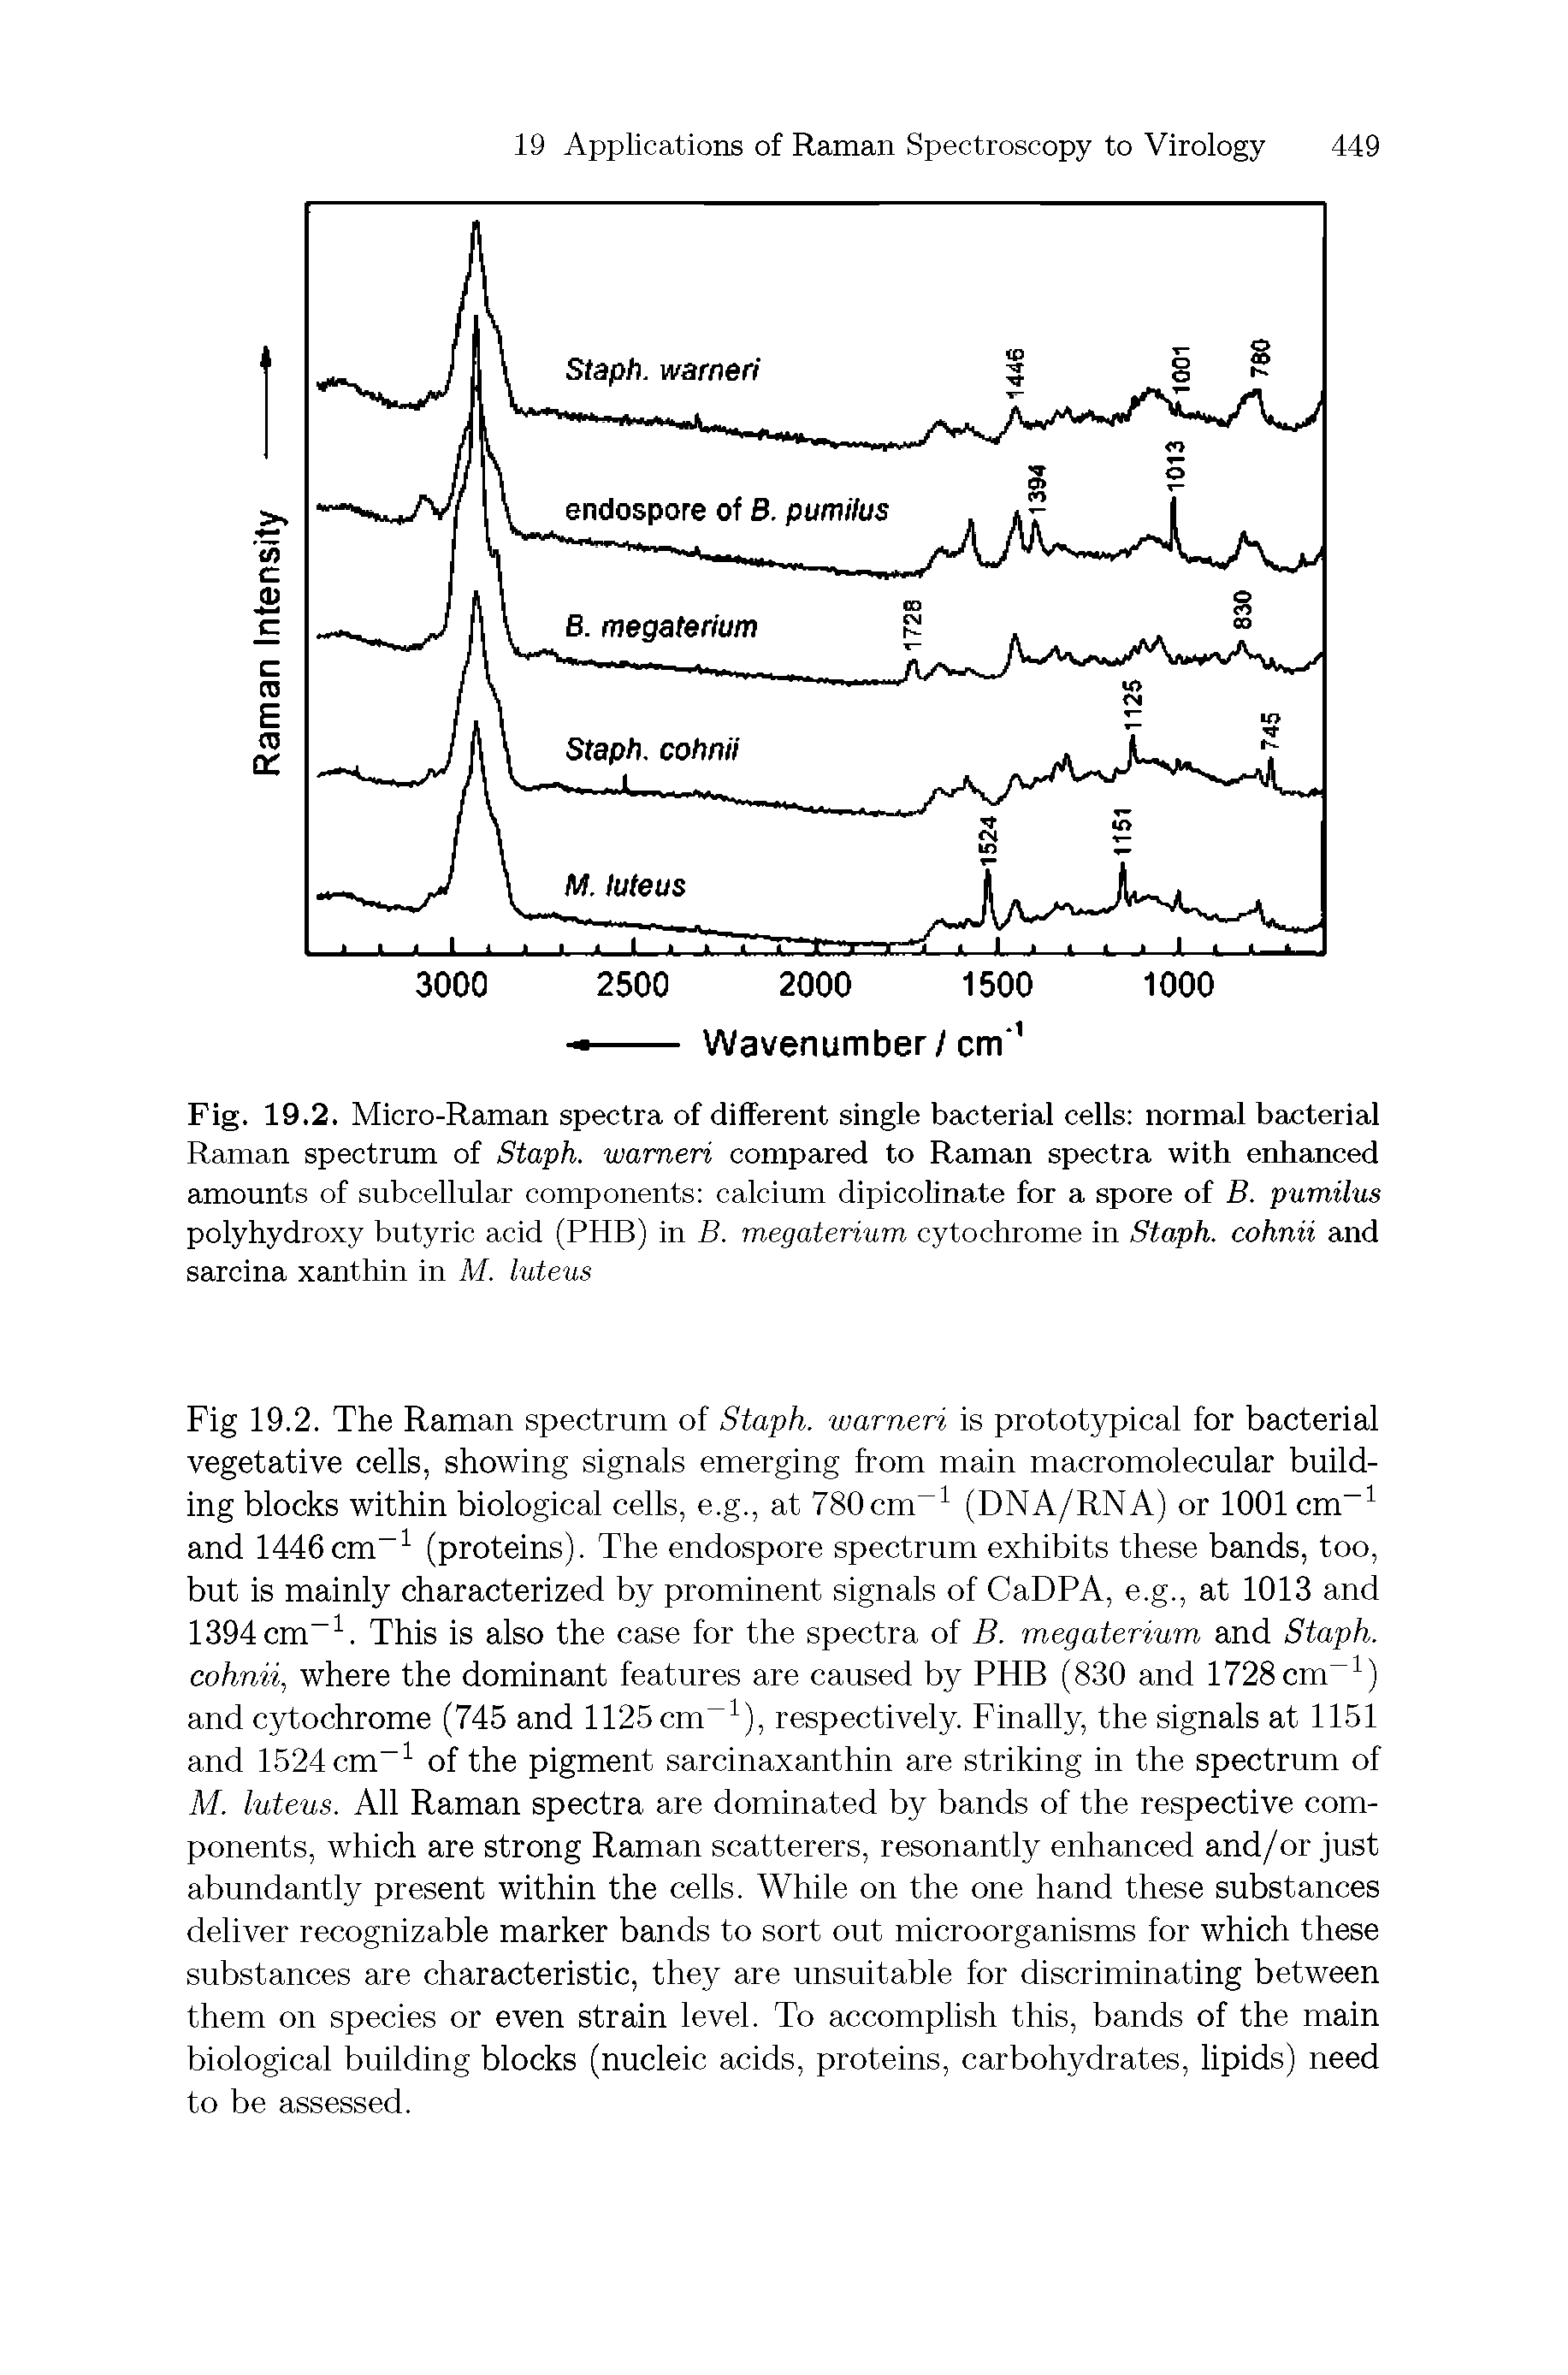 Fig. 19.2. Micro-Raman spectra of different single bacterial cells normal bacterial Raman spectrum of Staph, wameri compared to Raman spectra with enhanced amounts of subcellular components calcium dipicolinate for a spore of B. pumilus polyhydroxy butyric acid (PHB) in B. megaterium cytochrome in Staph, cohnii and sarcina xanthin in M. luteus...